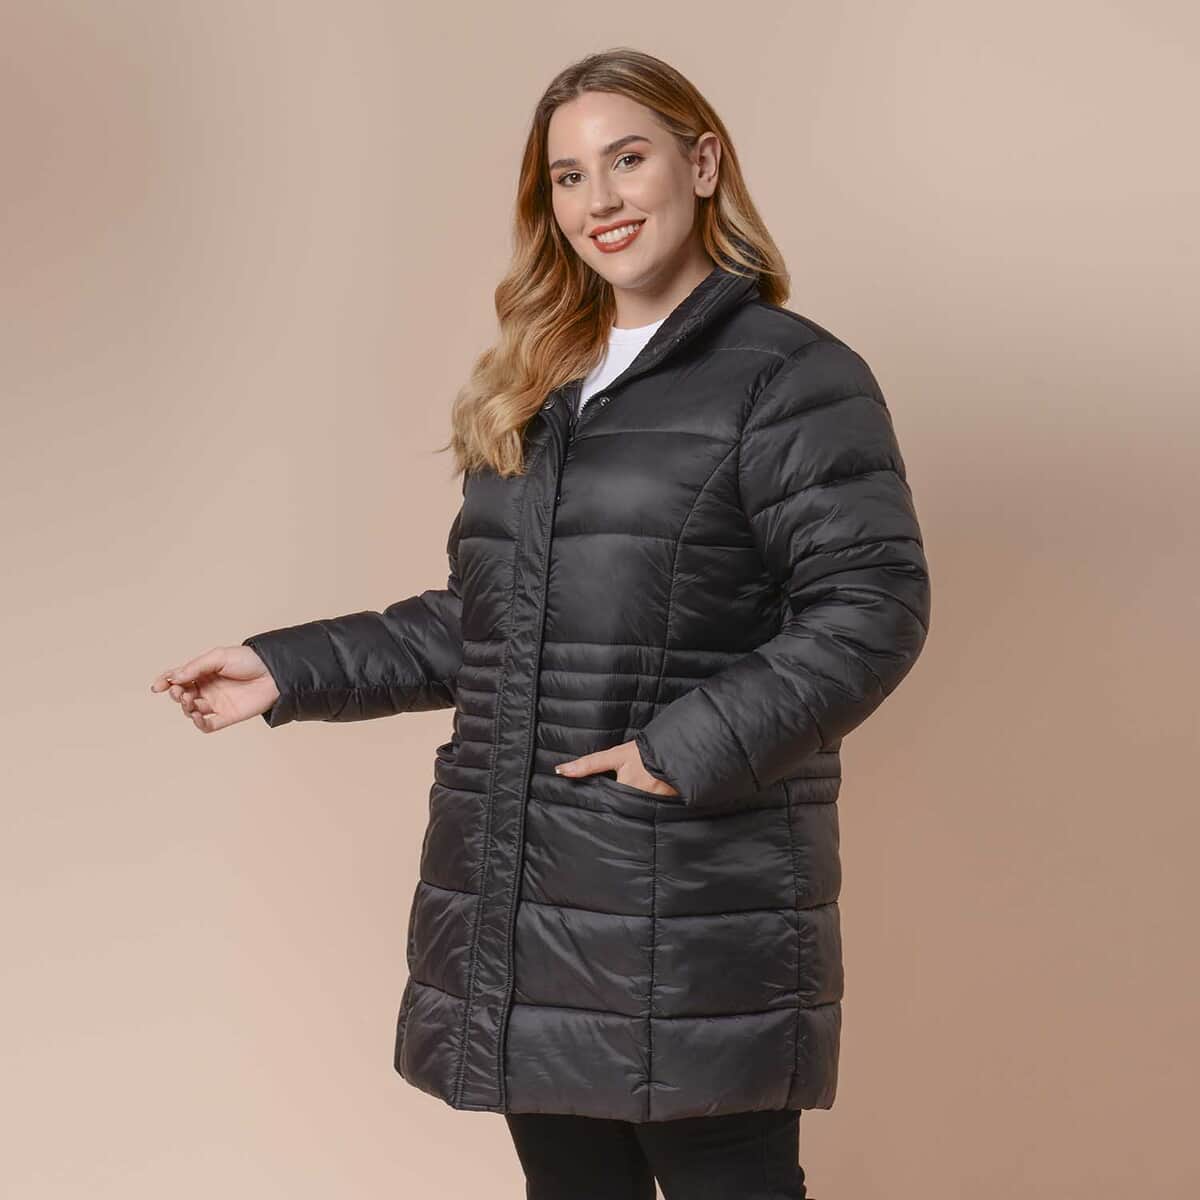 Doorbuster PASSAGE Black Long Sleeve Women Coat with 2 Zipper Pocket (S, Shell: 100% Nylon and Lining: 100% Polyester) image number 1